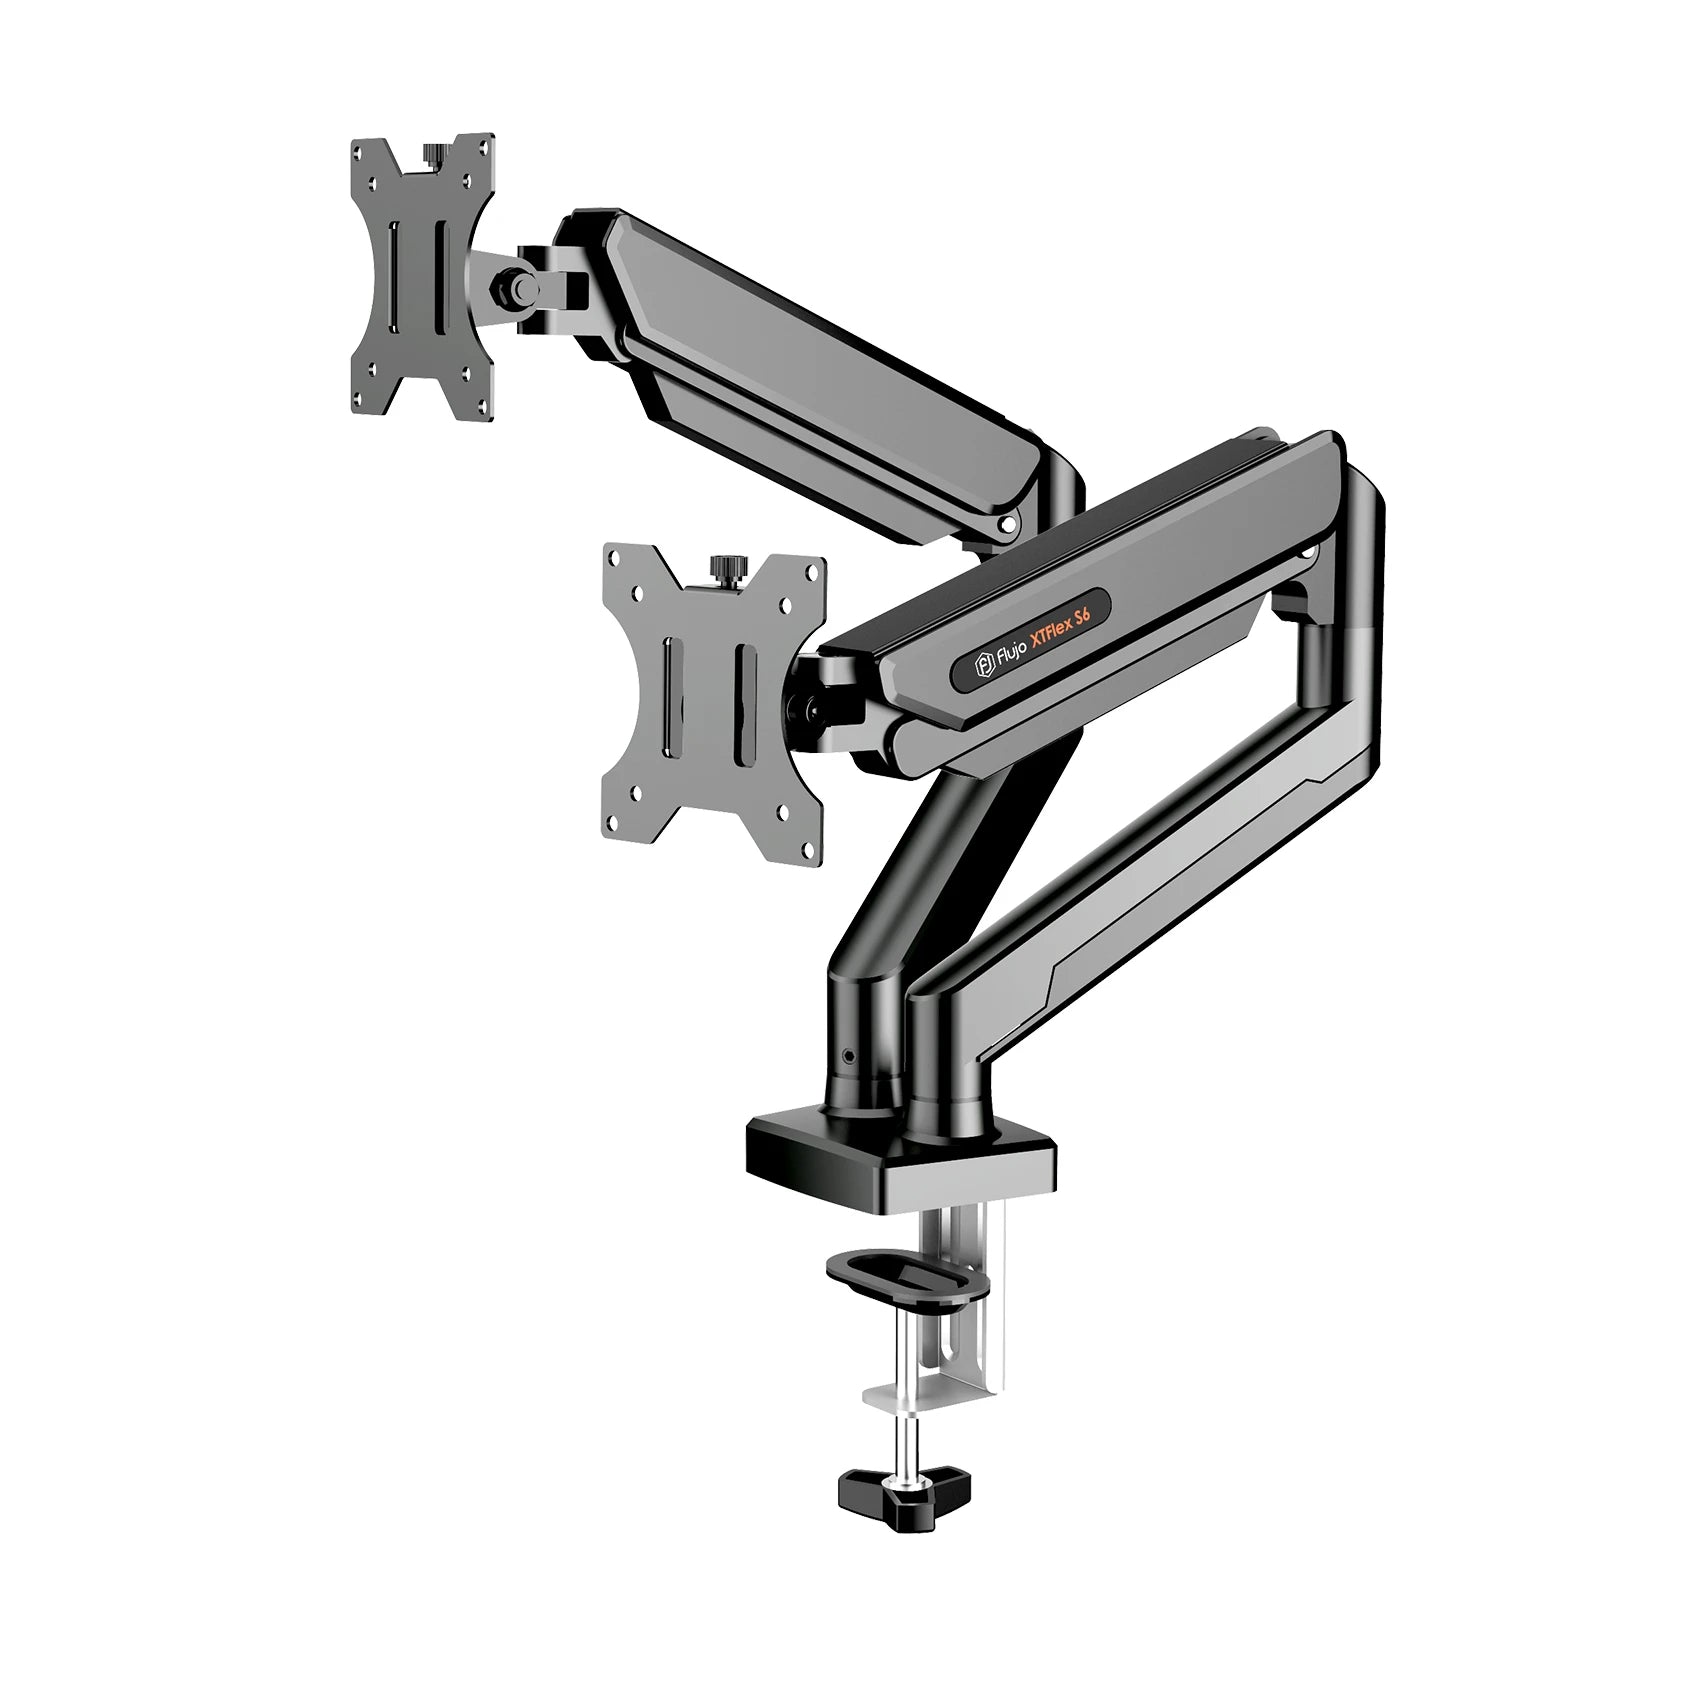 XTFlex S6 Dual Monitor Arm in black, showcasing its robust design with dual arms for maximum screen setup flexibility and workspace ergonomics.